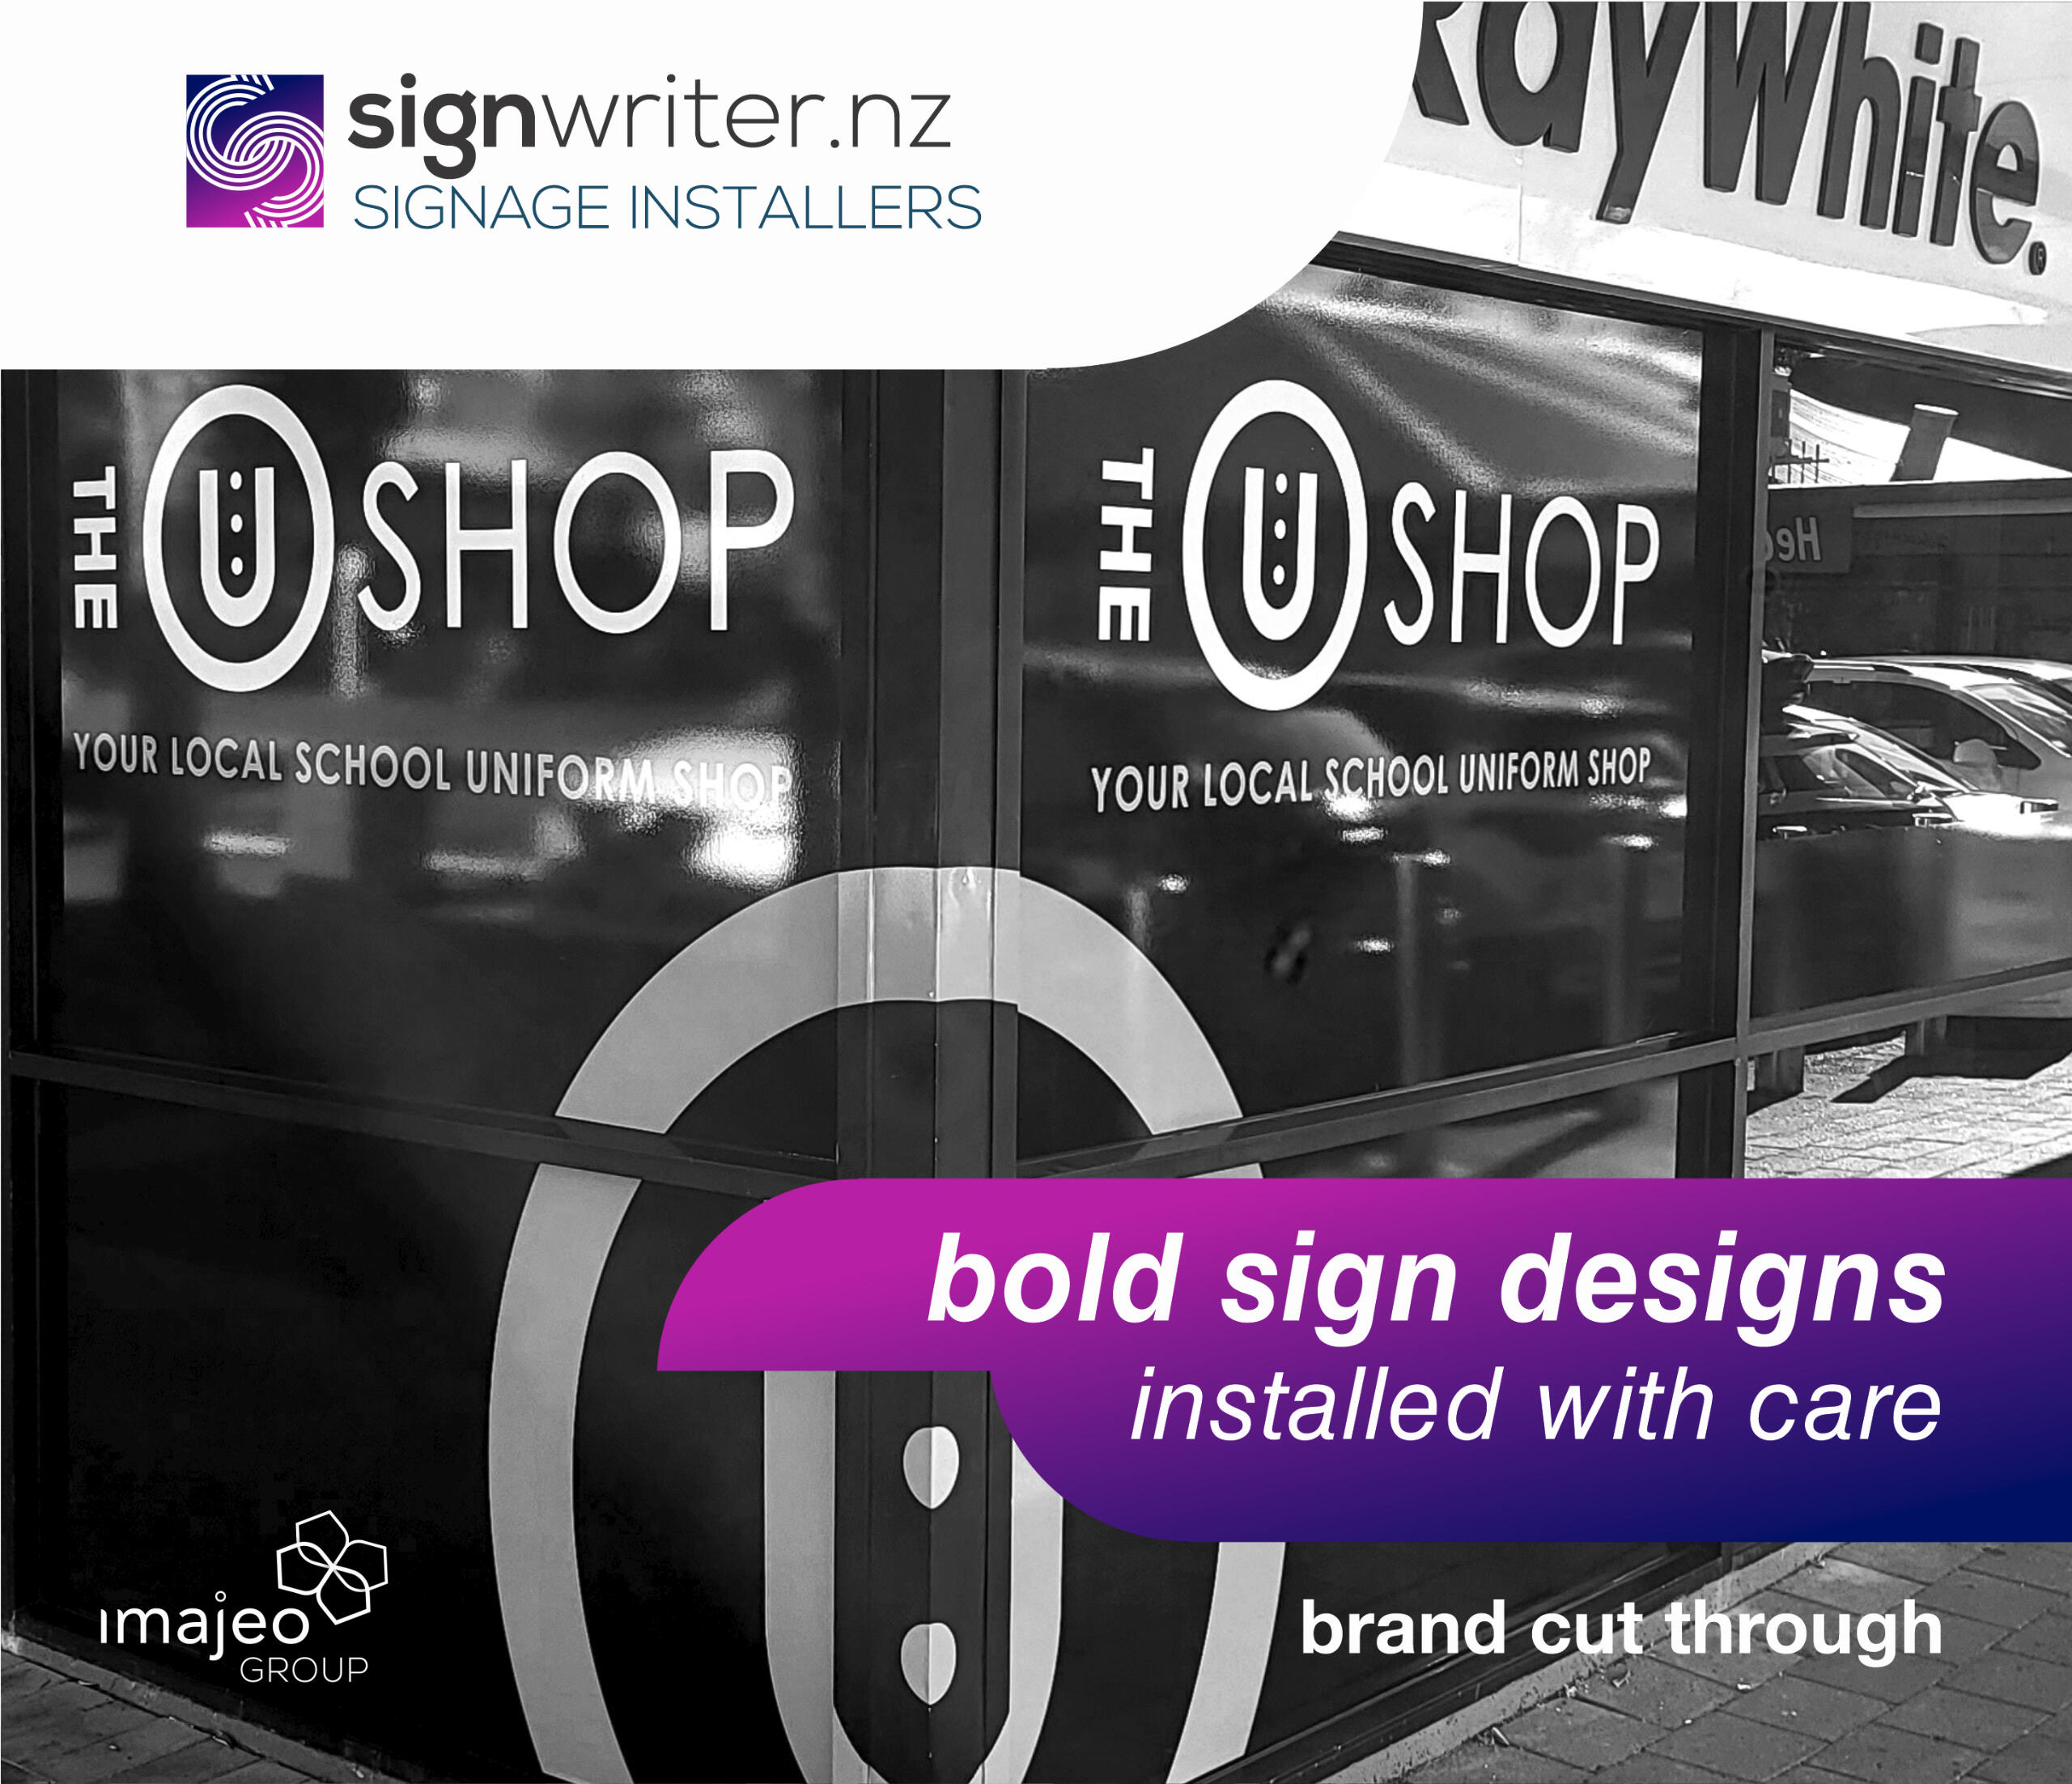 Signwriters, Rebranding specialists